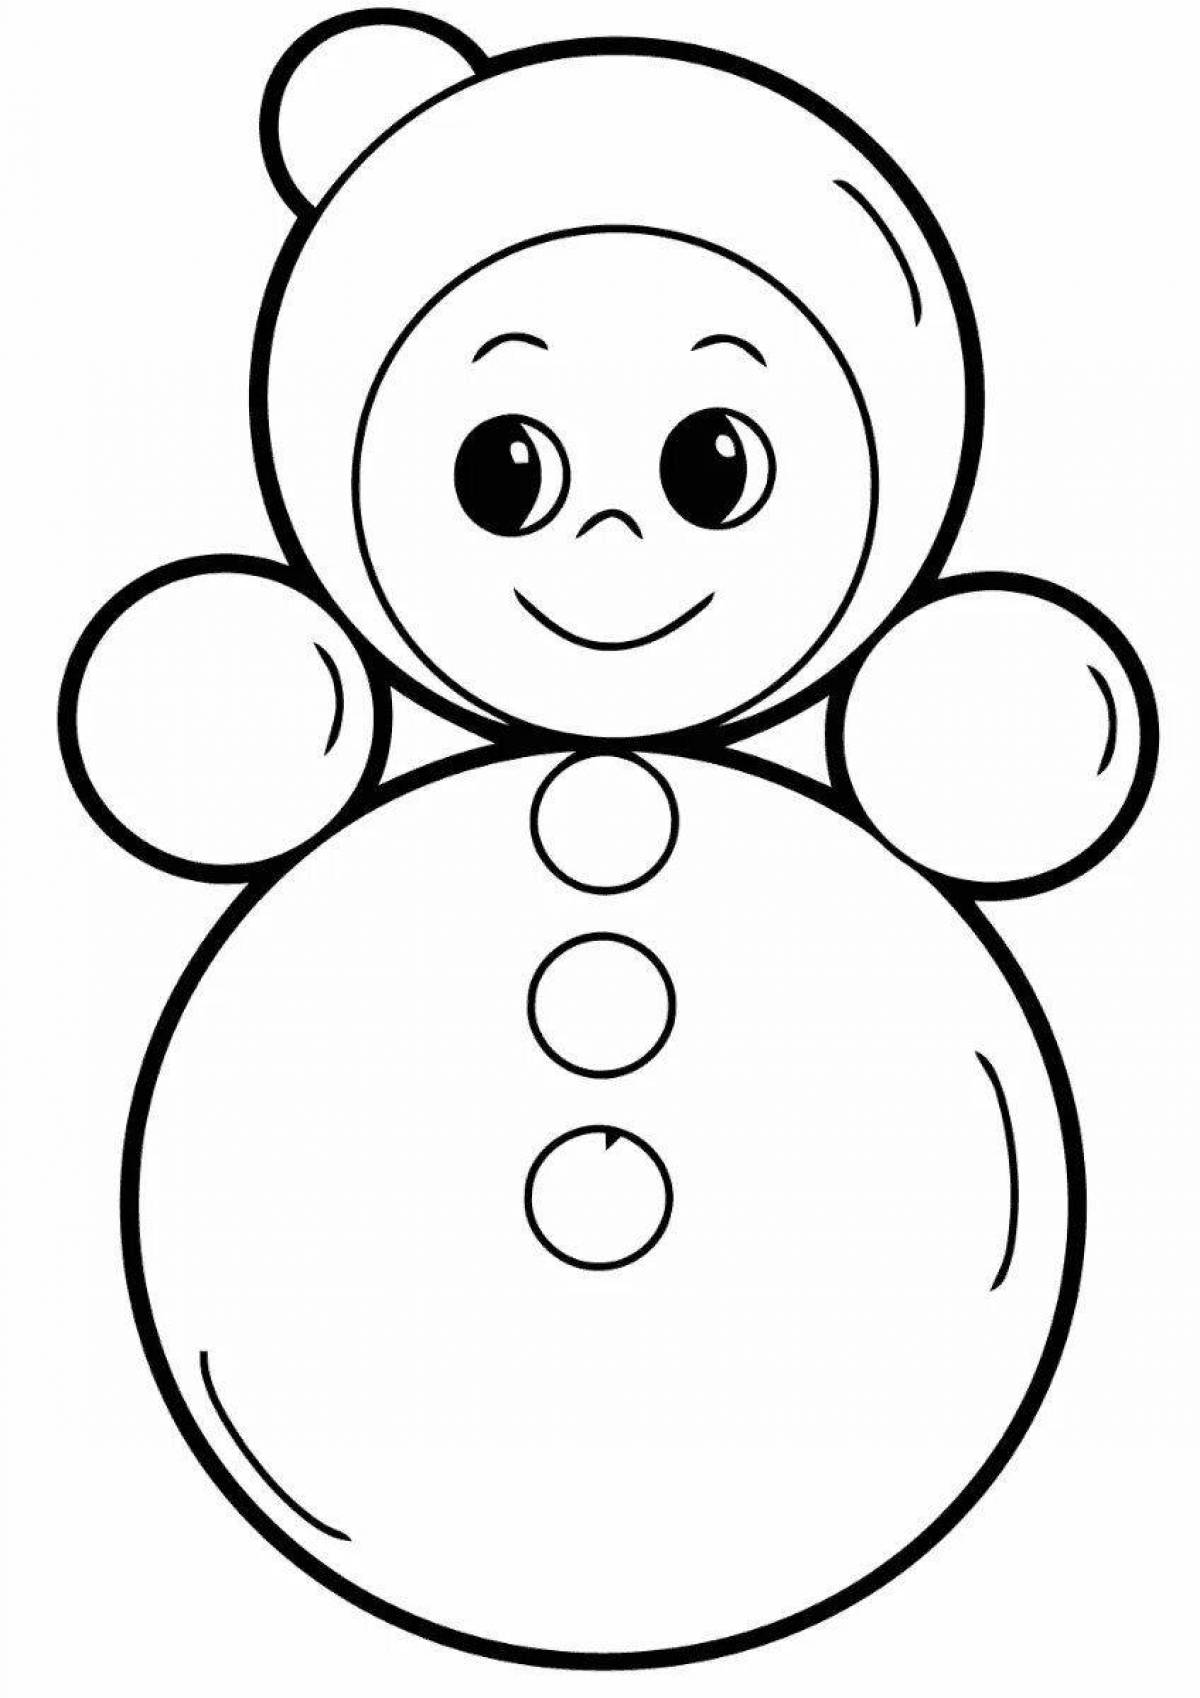 Humorous toy coloring pages